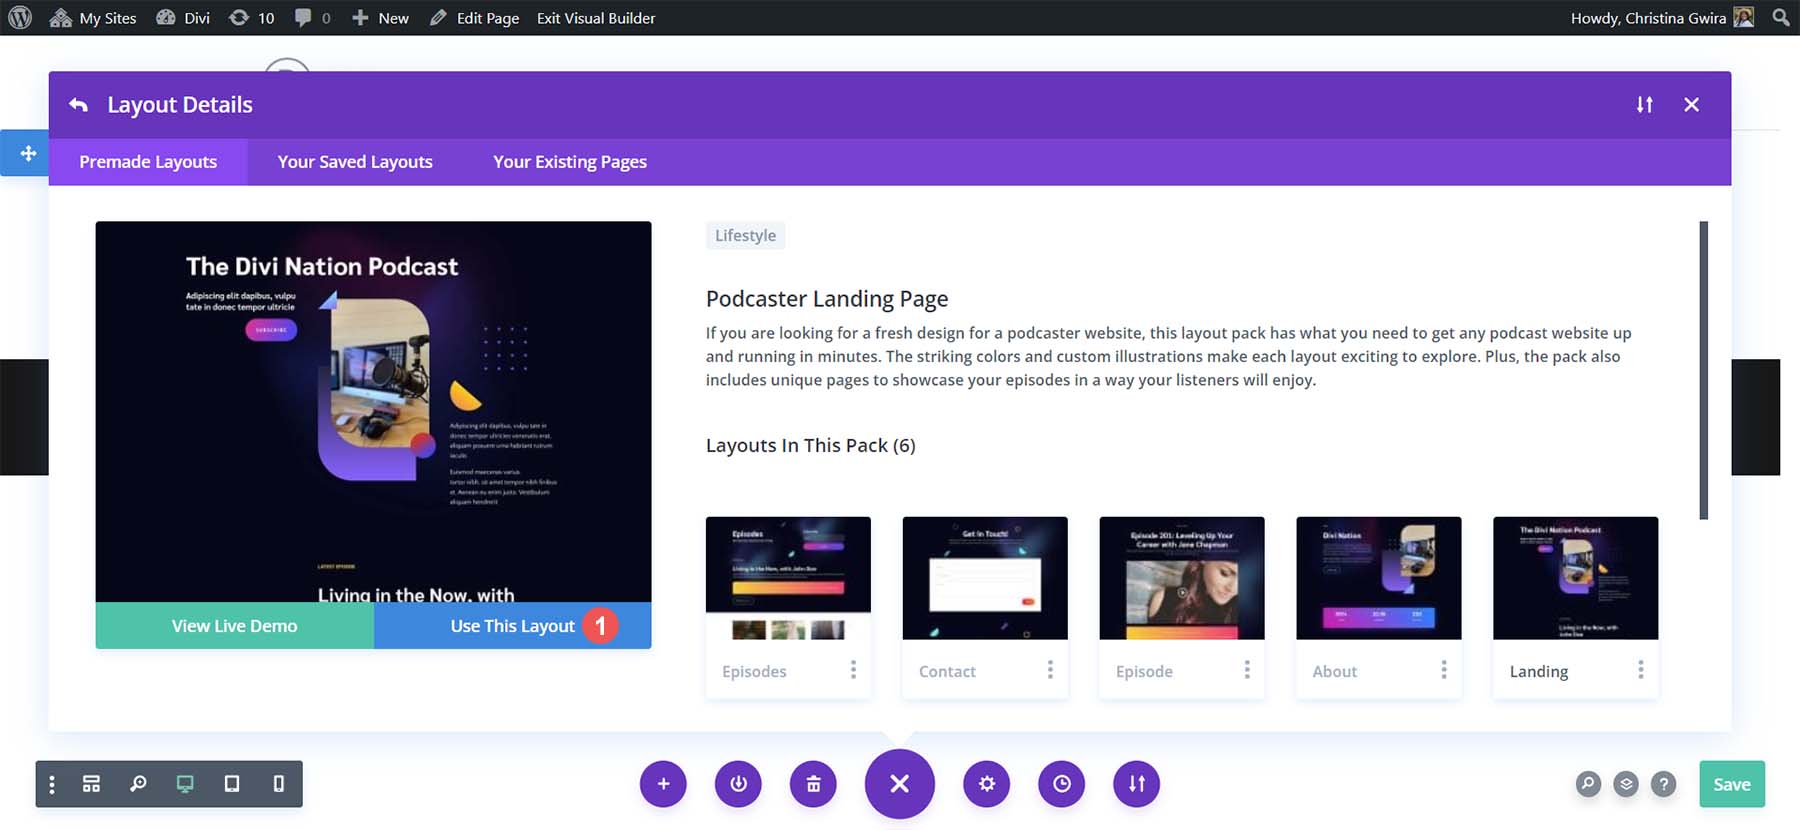 Click Use this Layout to install the landing page layout